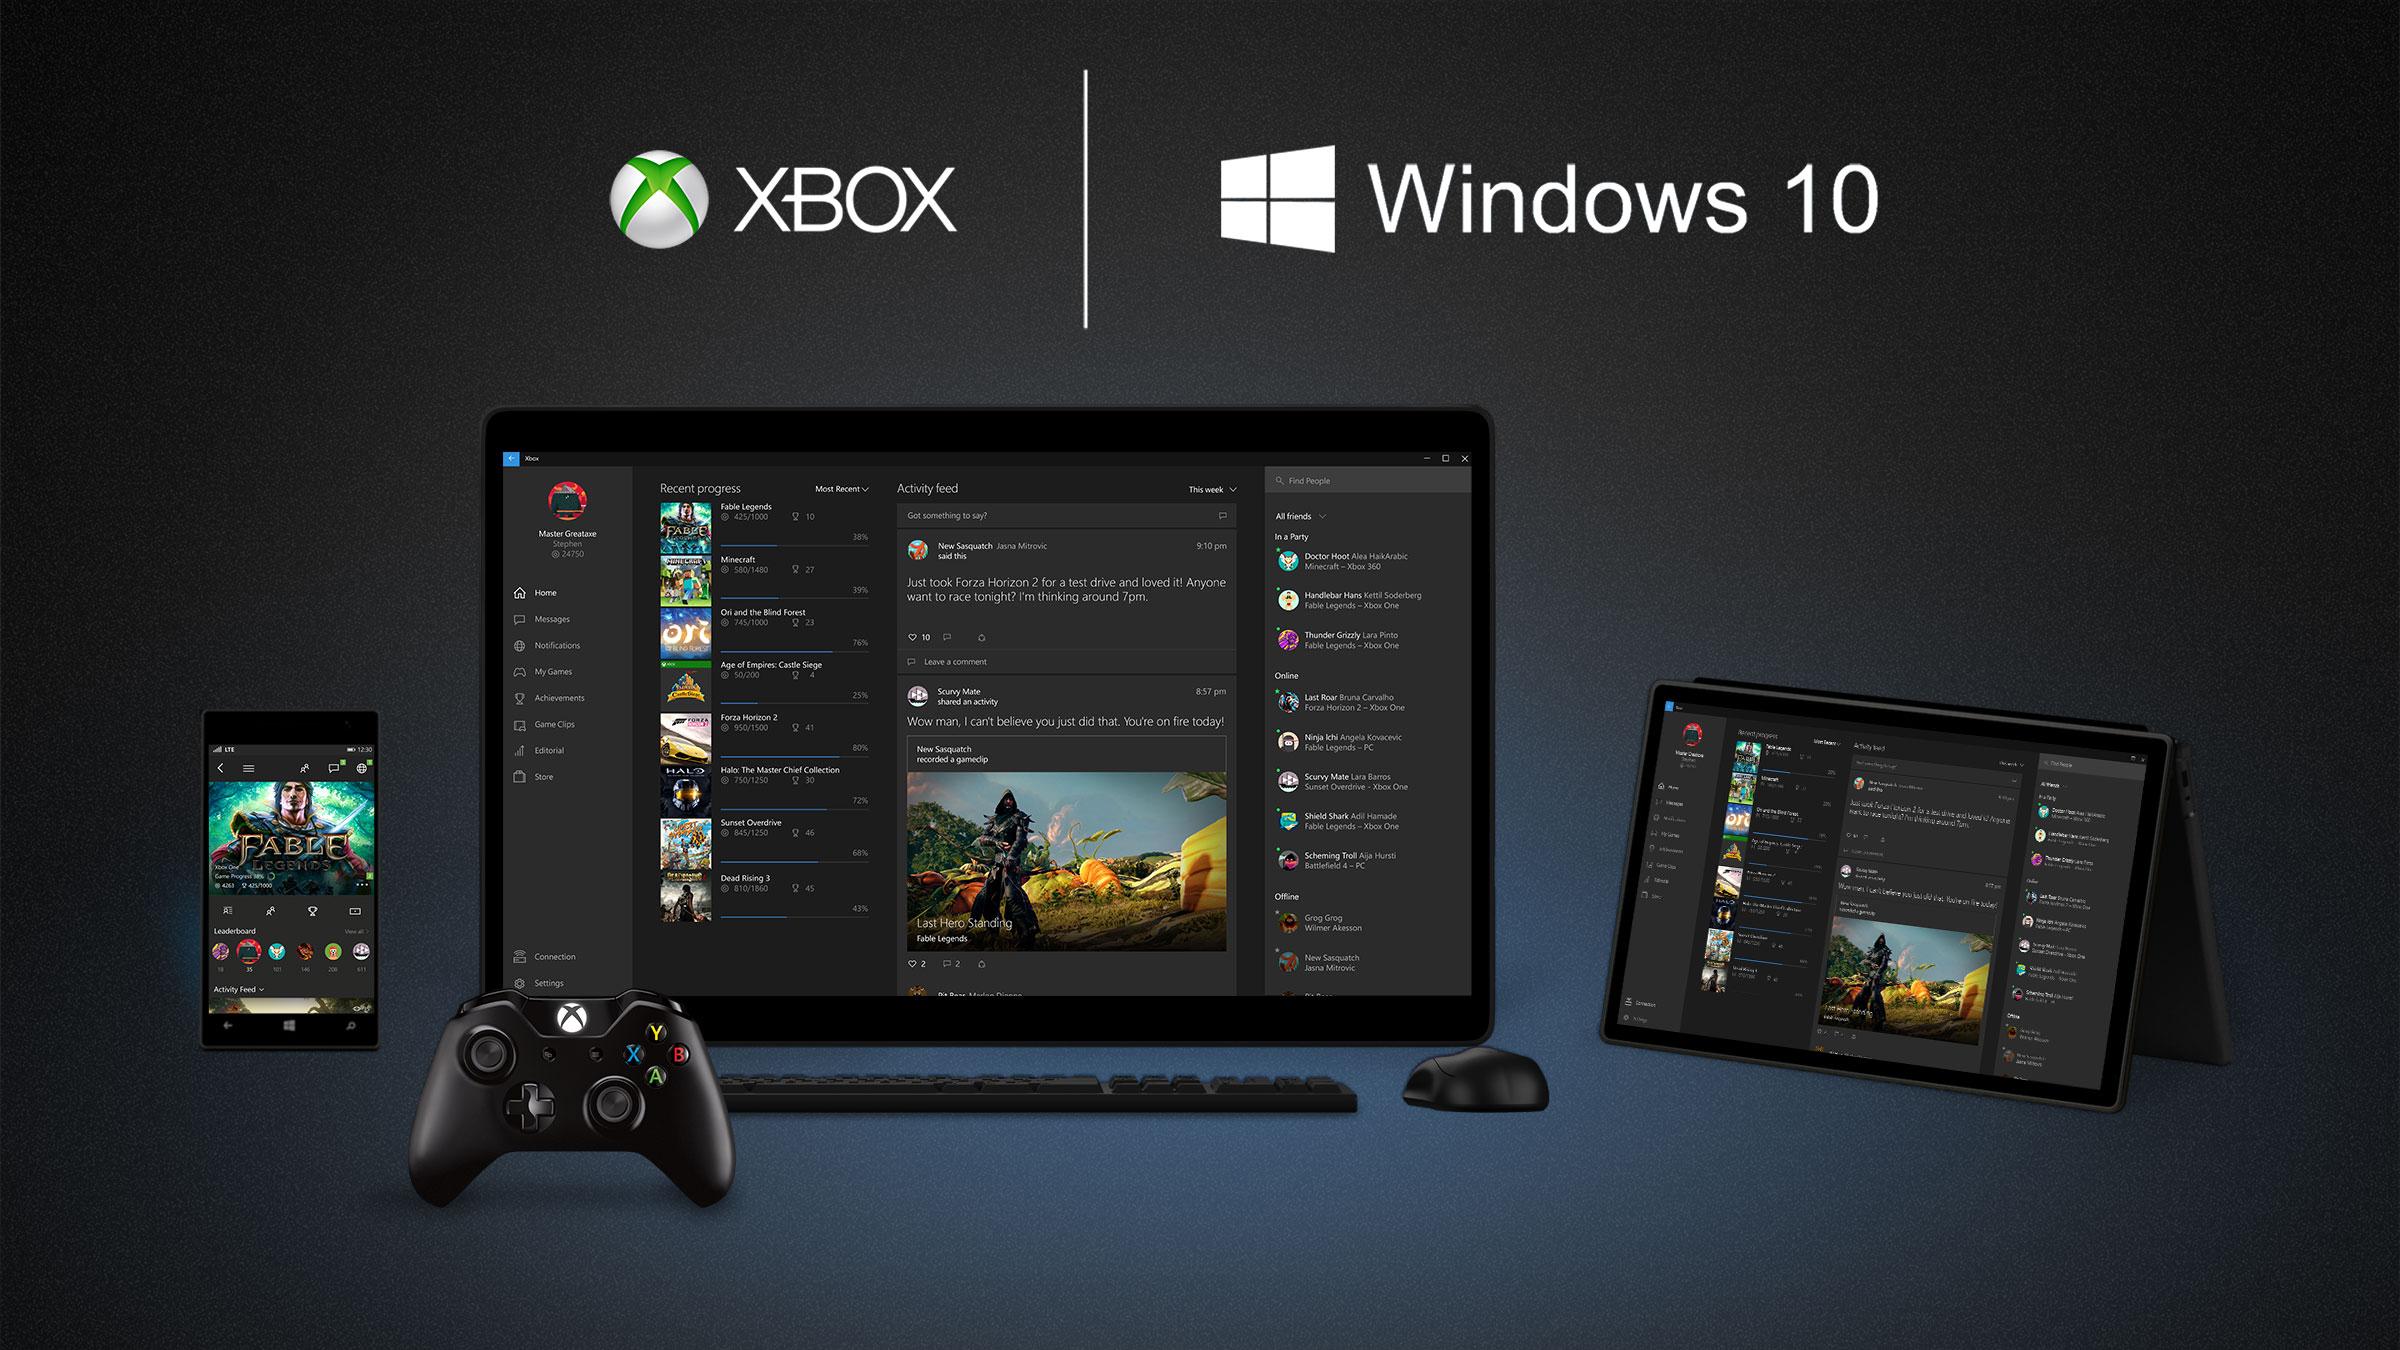 Xbox devices will soon include set top box to compete against Apple TV